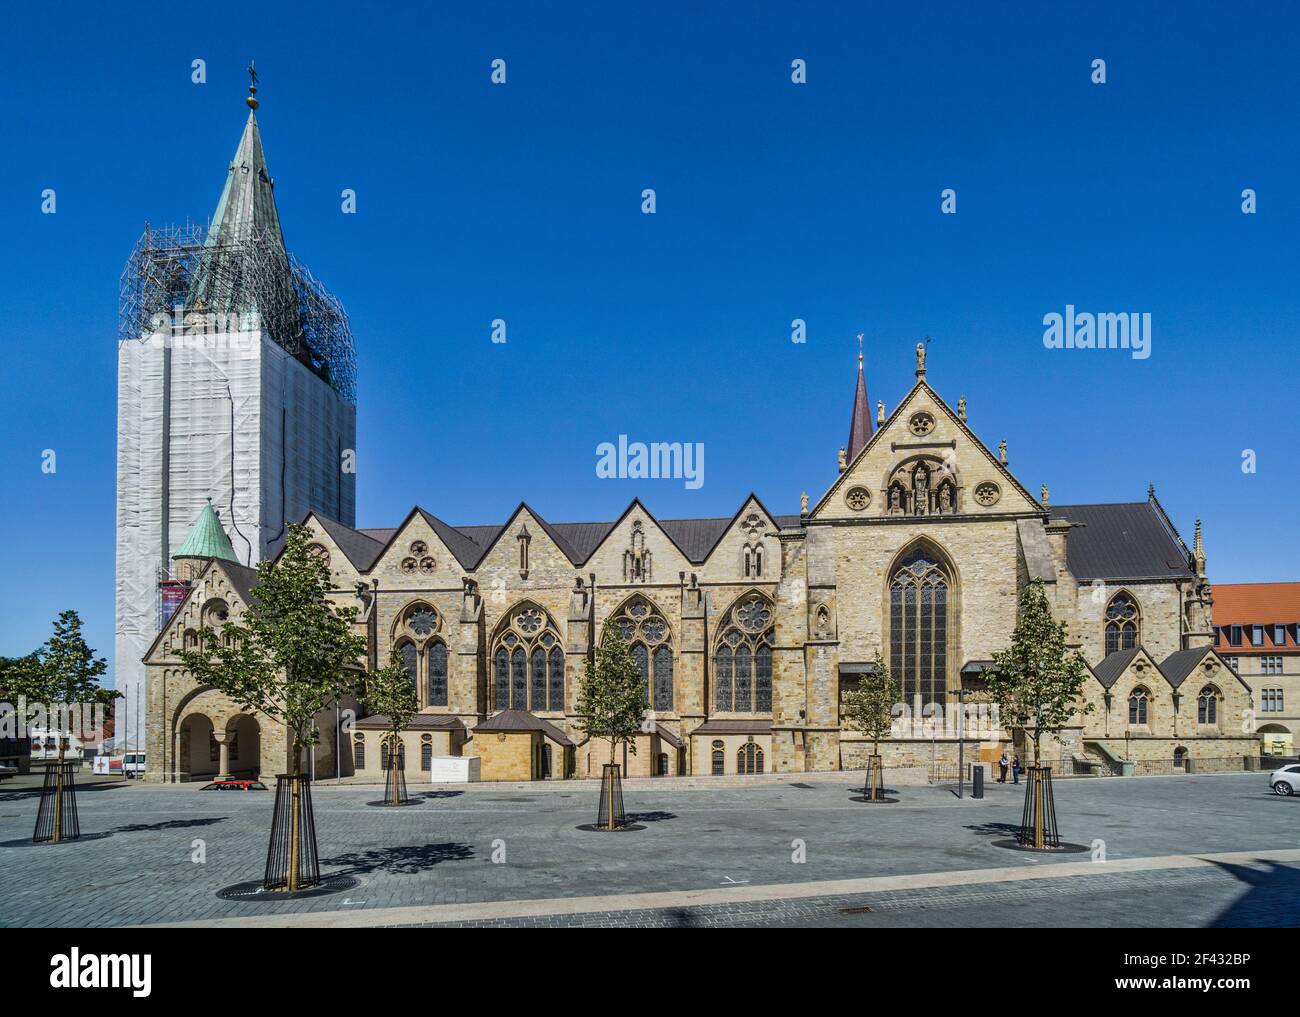 Paderborn germany hi-res stock photography and images - Alamy